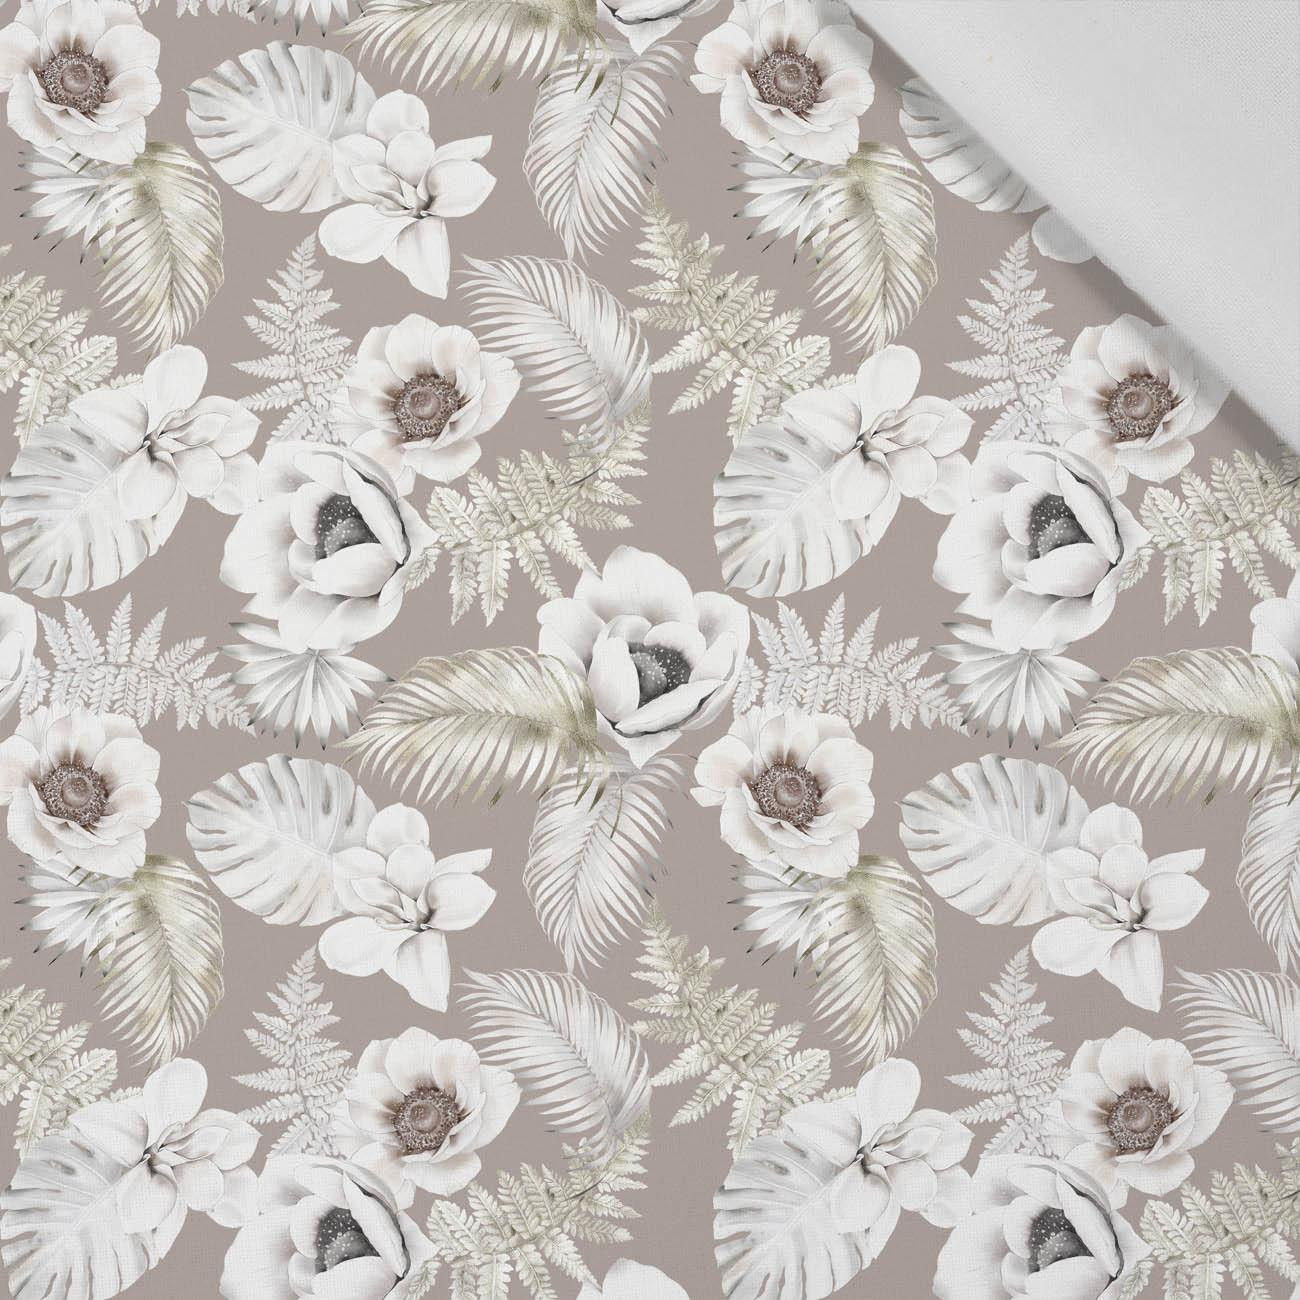 WHITE FLOWERS PAT. 3 - Cotton woven fabric